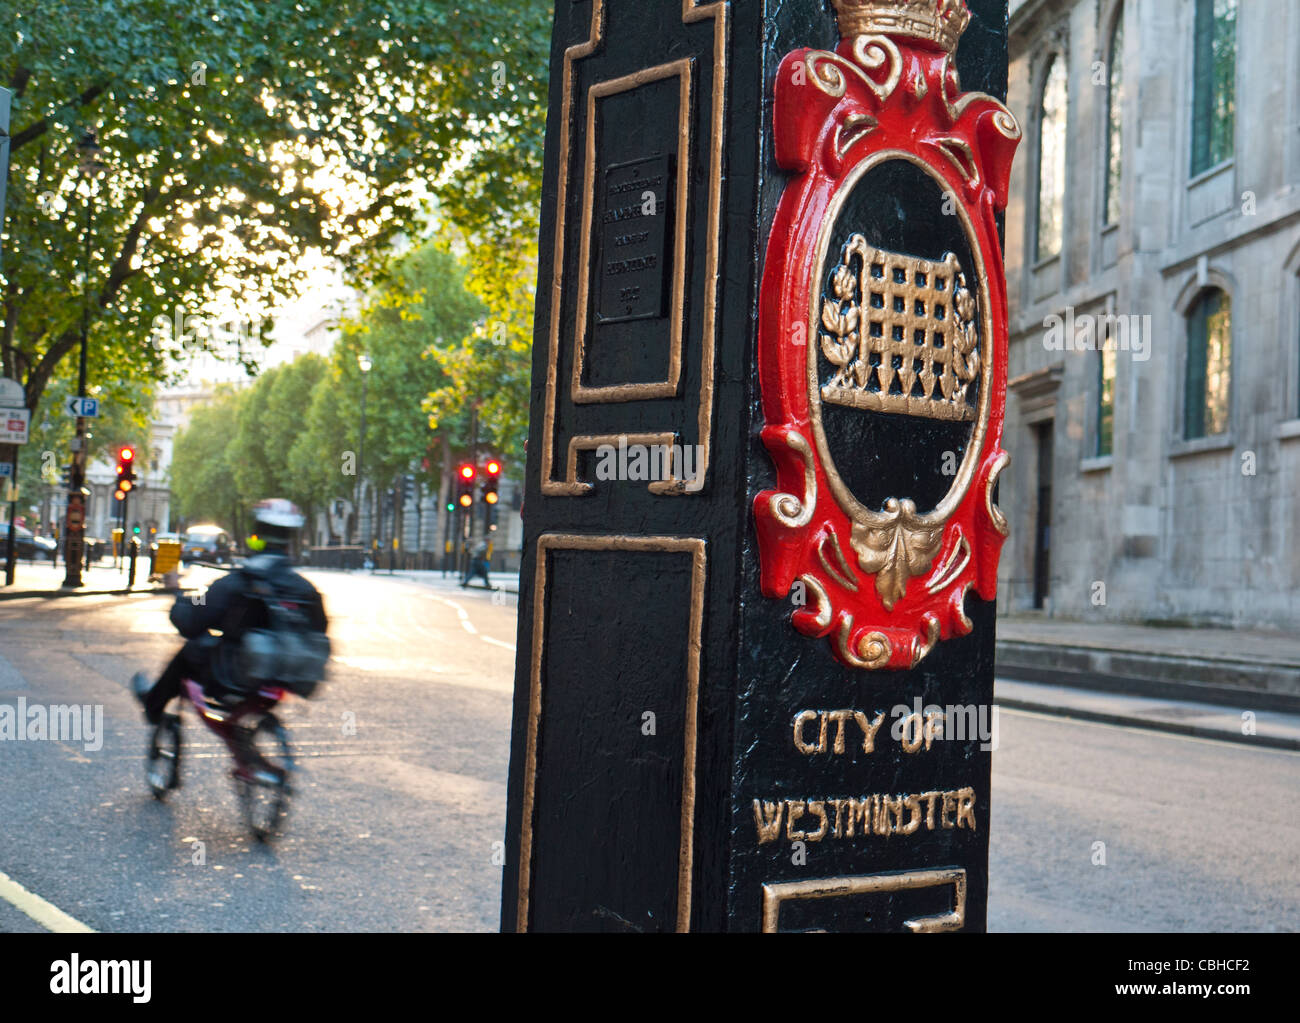 Ornate post with heraldic coat of arms with passing cyclist at boundary entrance to the City of Westminster Holborn London UK Stock Photo